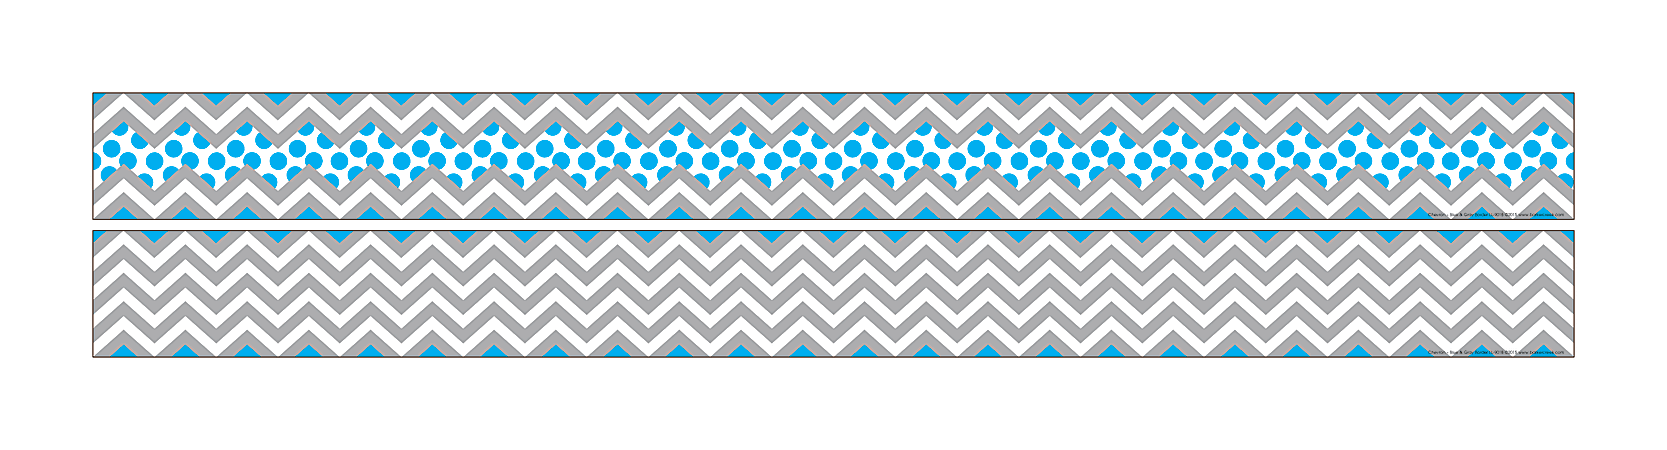 Barker Creek Double-Sided Straight-Edge Border Strips, 3" x 35", Chevron Gray And Blue, Pack Of 12